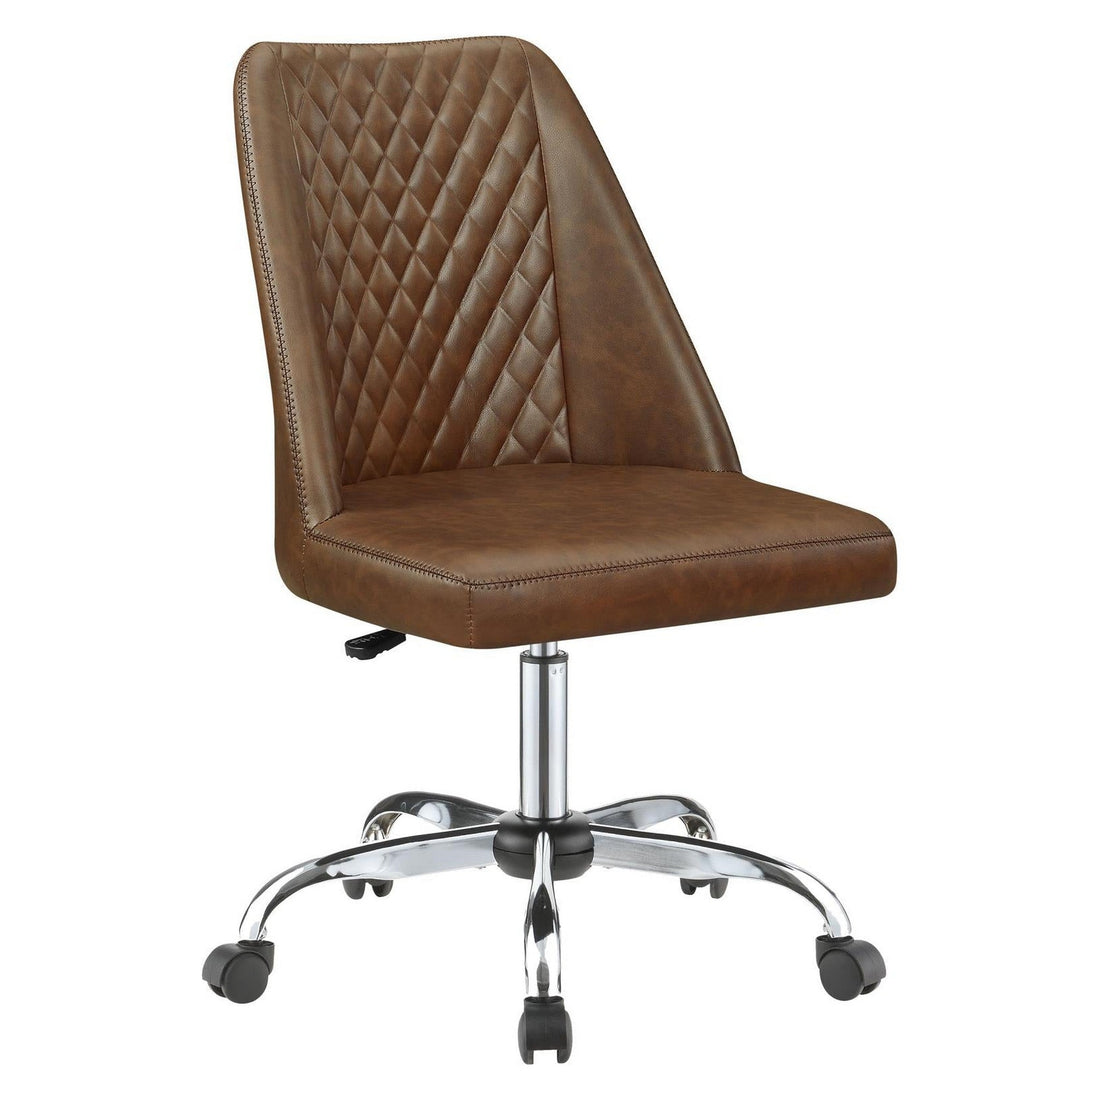 Althea Upholstered Tufted Back Office Chair Brown and Chrome 881197